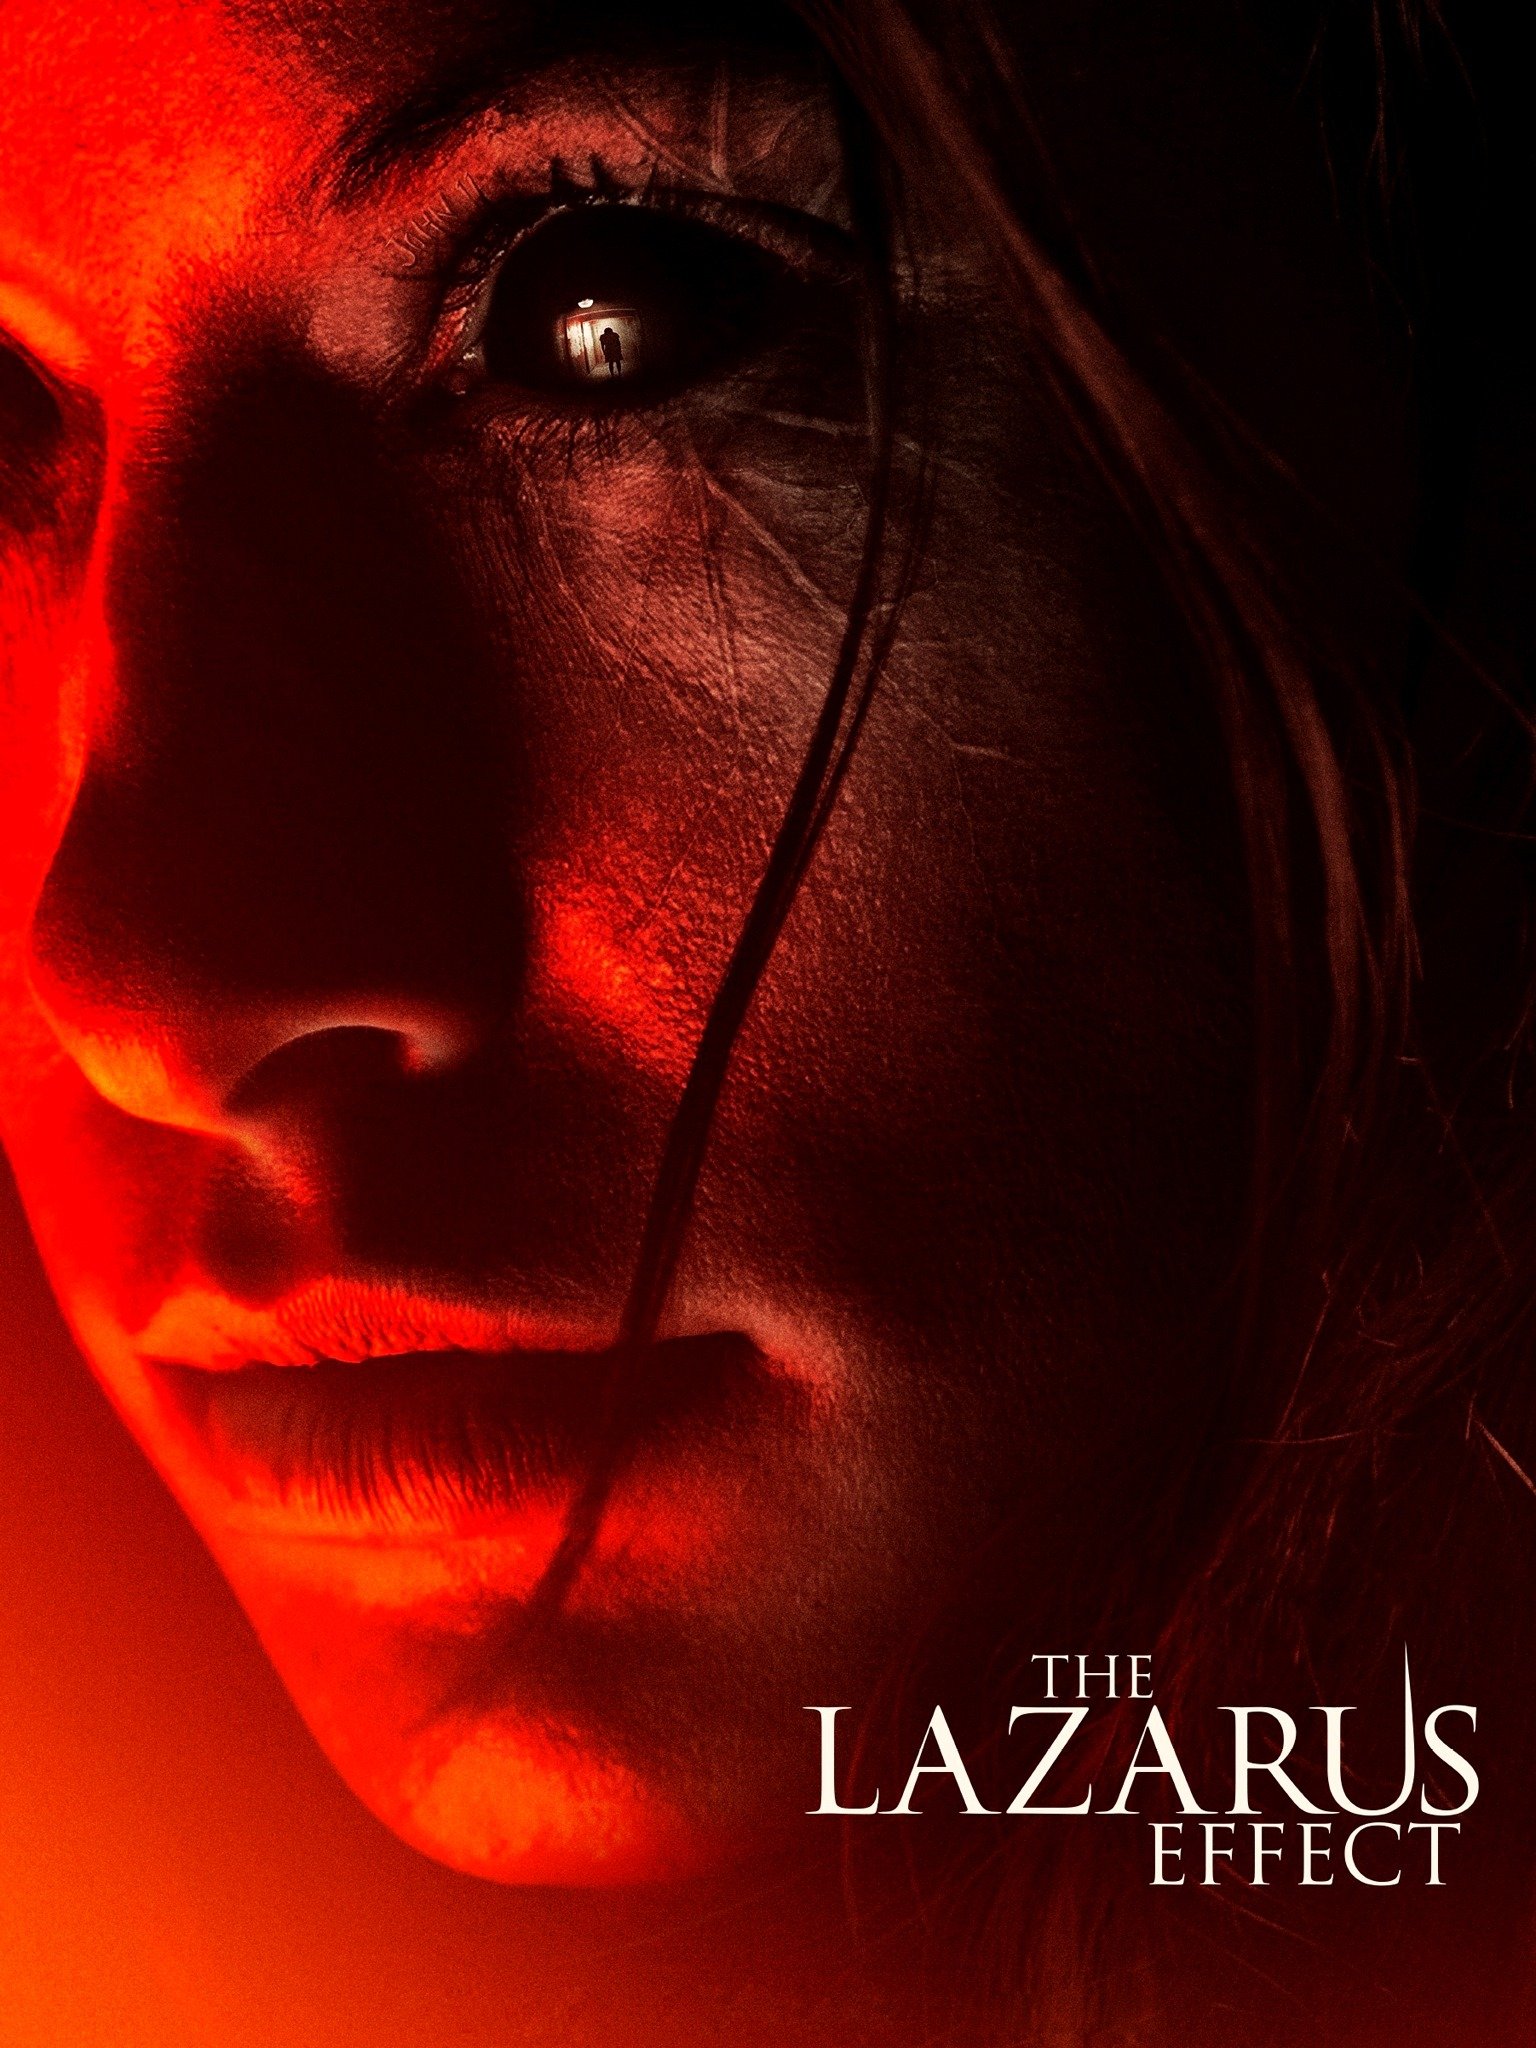 The Lazarus Effect Trailer 1 Trailers Videos Rotten Tomatoes